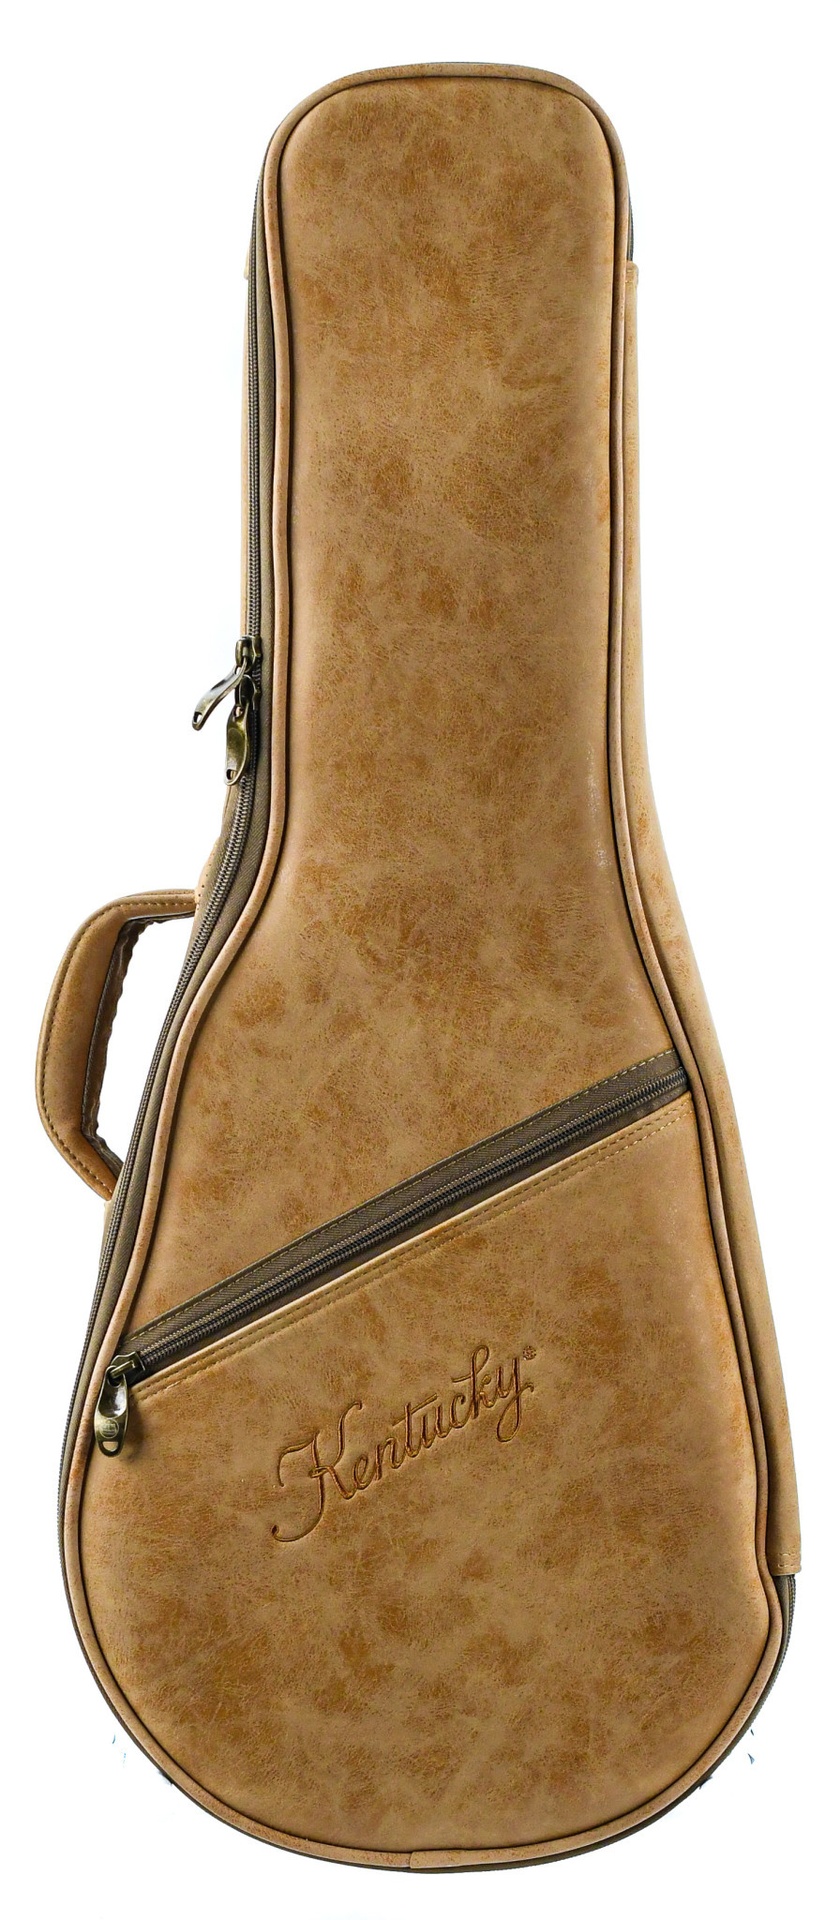 Gigbags for Other Instruments